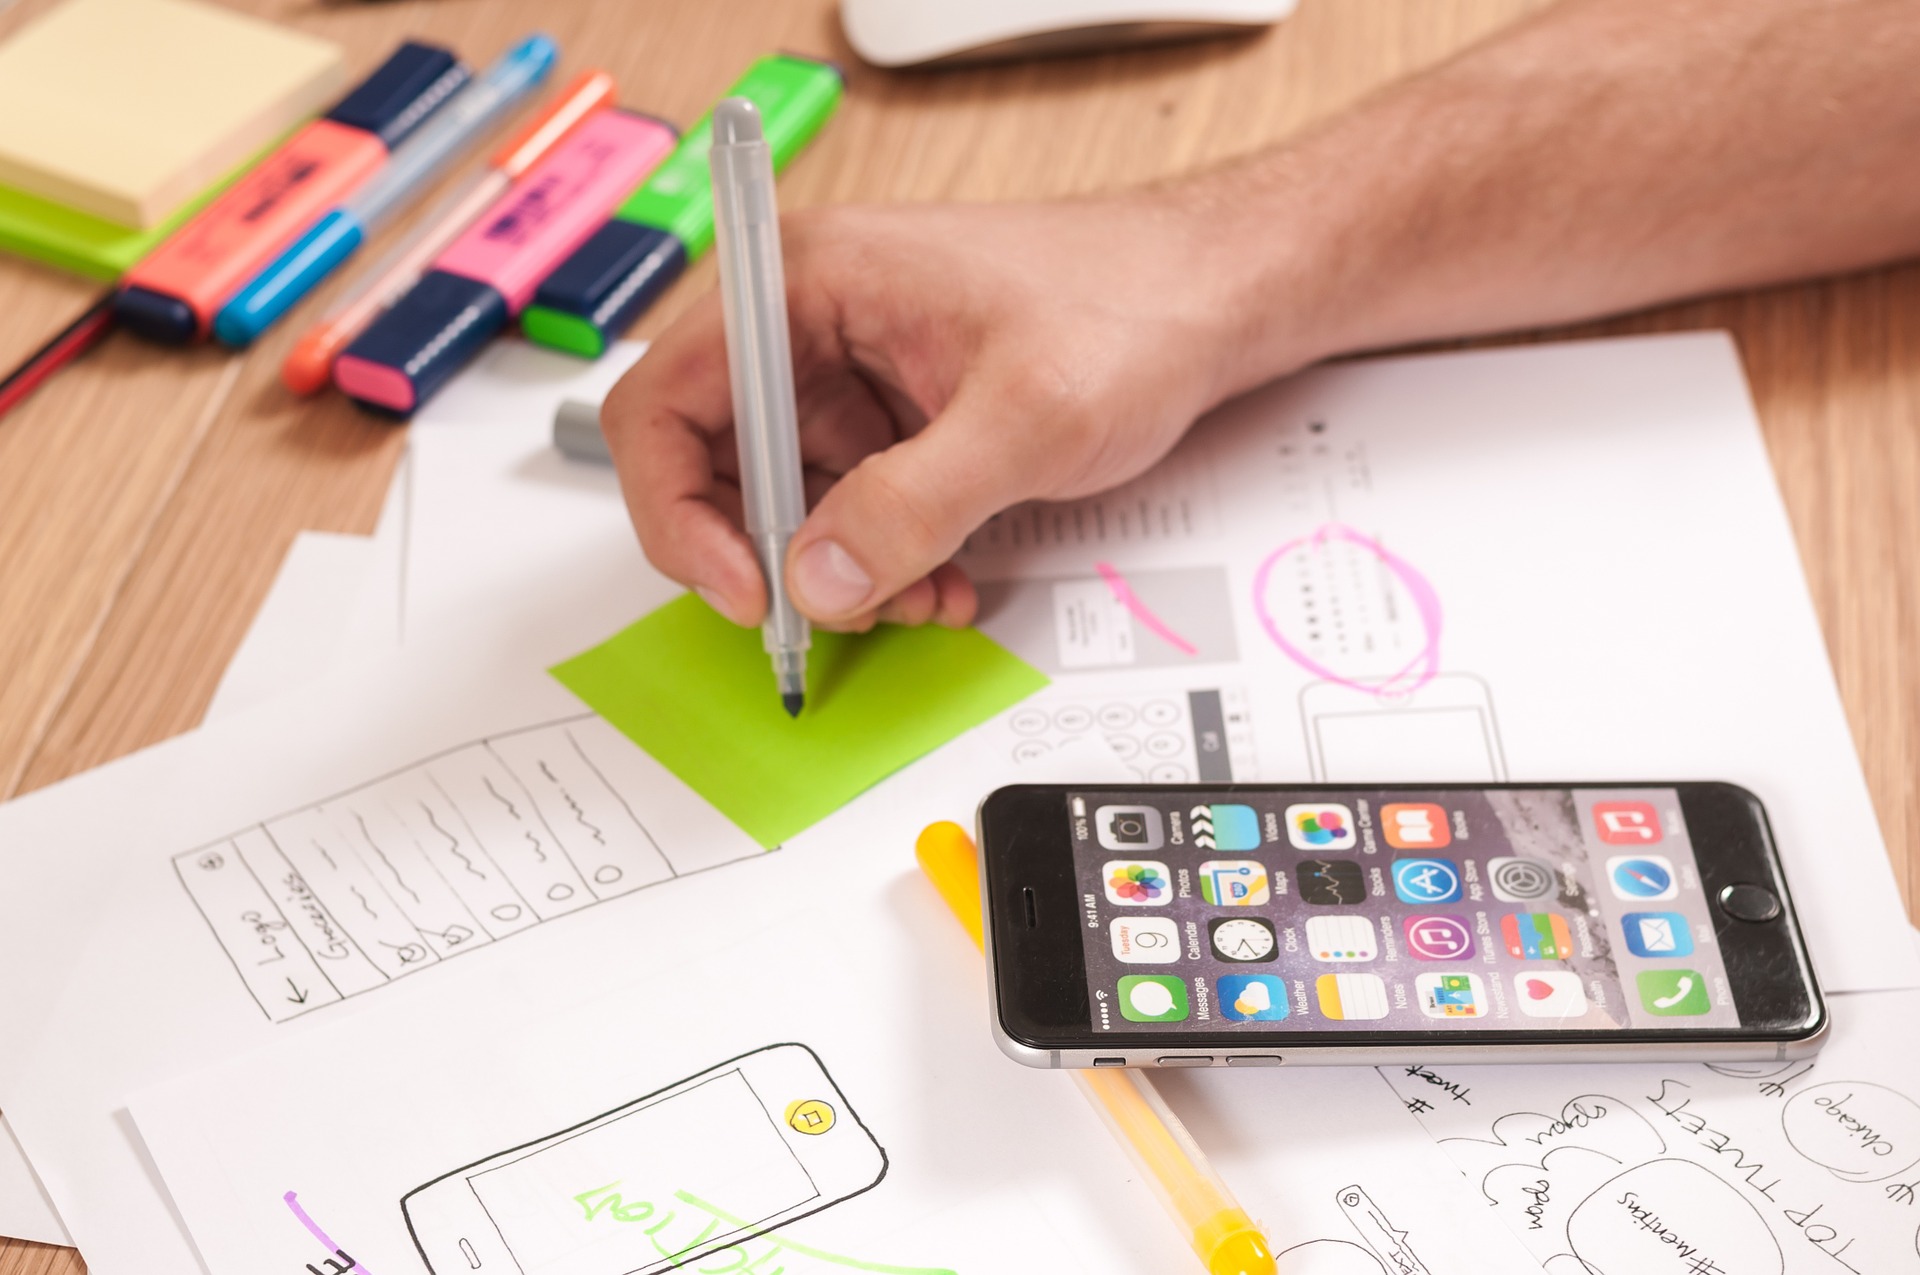 5 Tips for Making Your App Idea a Success